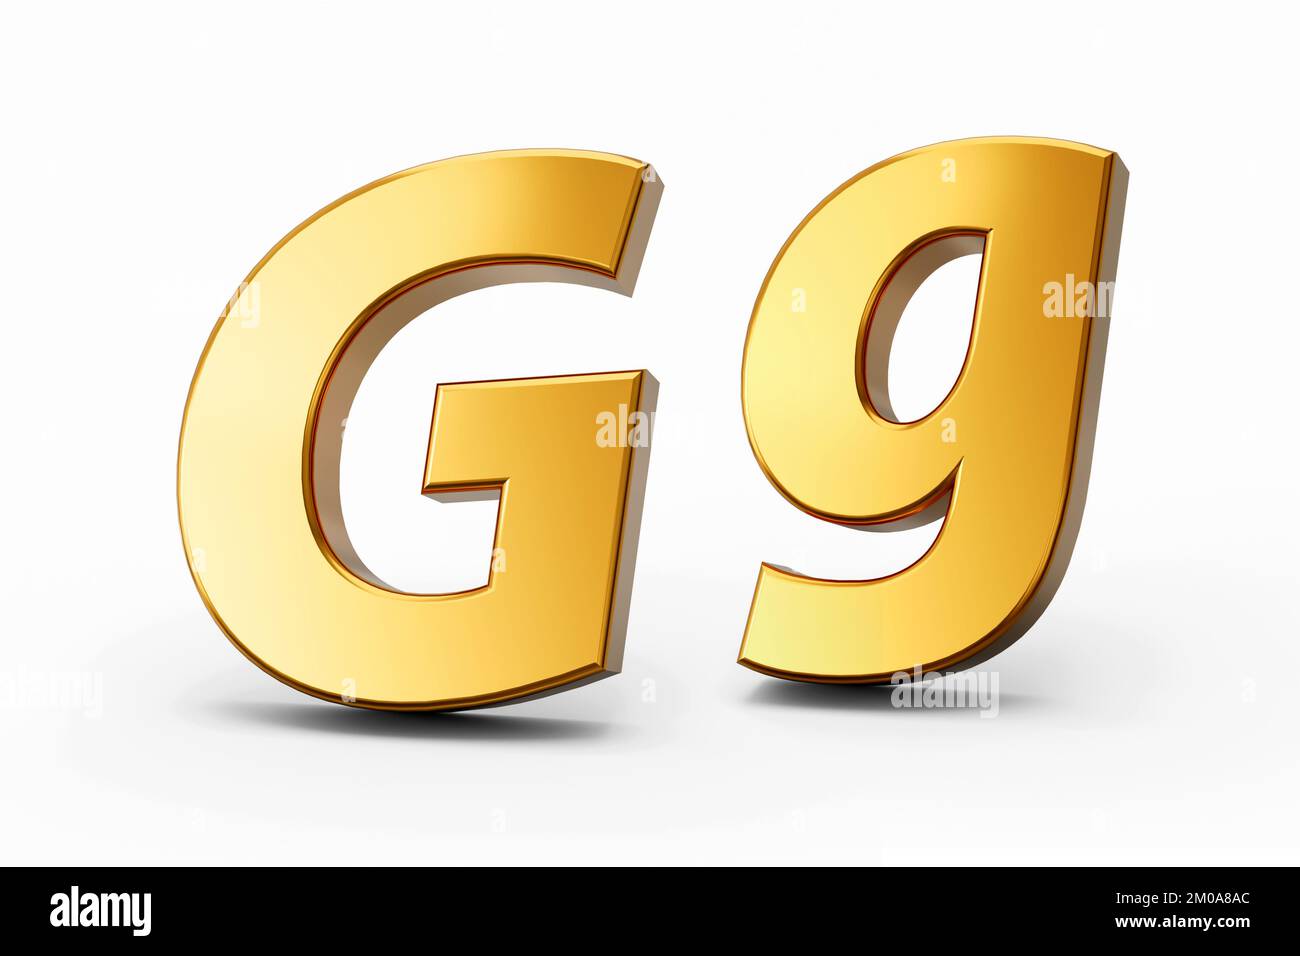 A 3D rendering of a letter G in gold metal isolated on white background Stock Photo